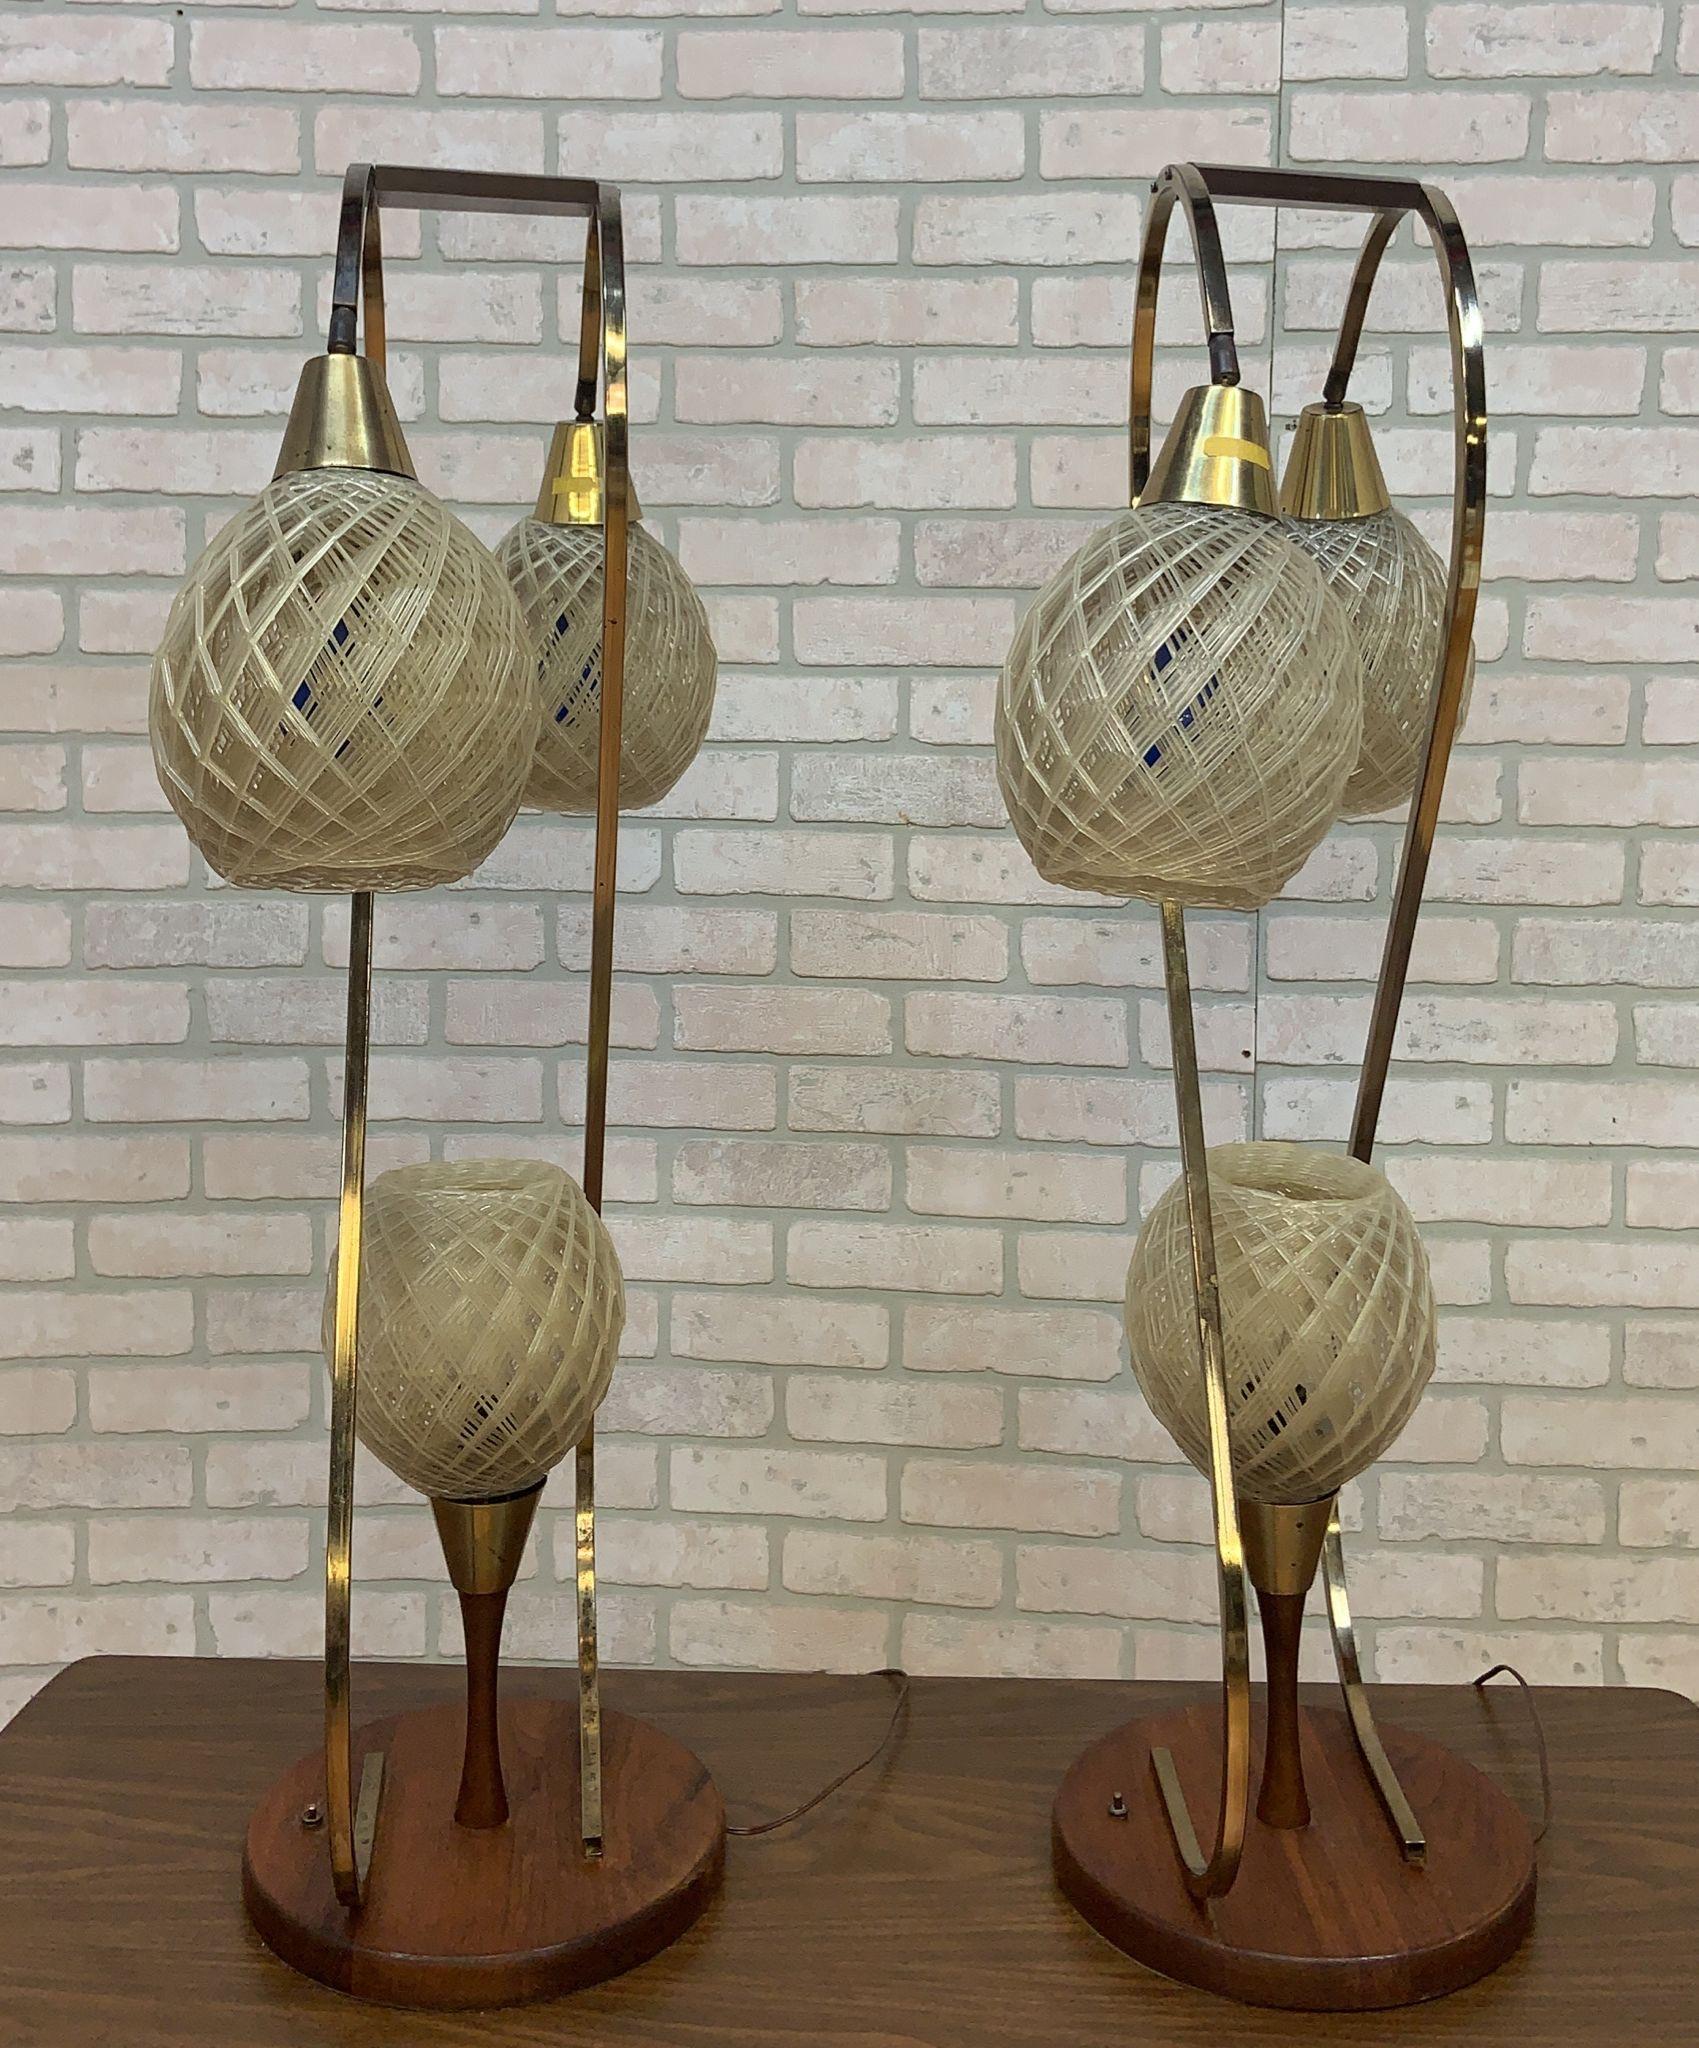 Mid Century Modern Space Age Atomic Lucite Spaghetti Globe Table Lamp - Pair In Good Condition For Sale In Chicago, IL